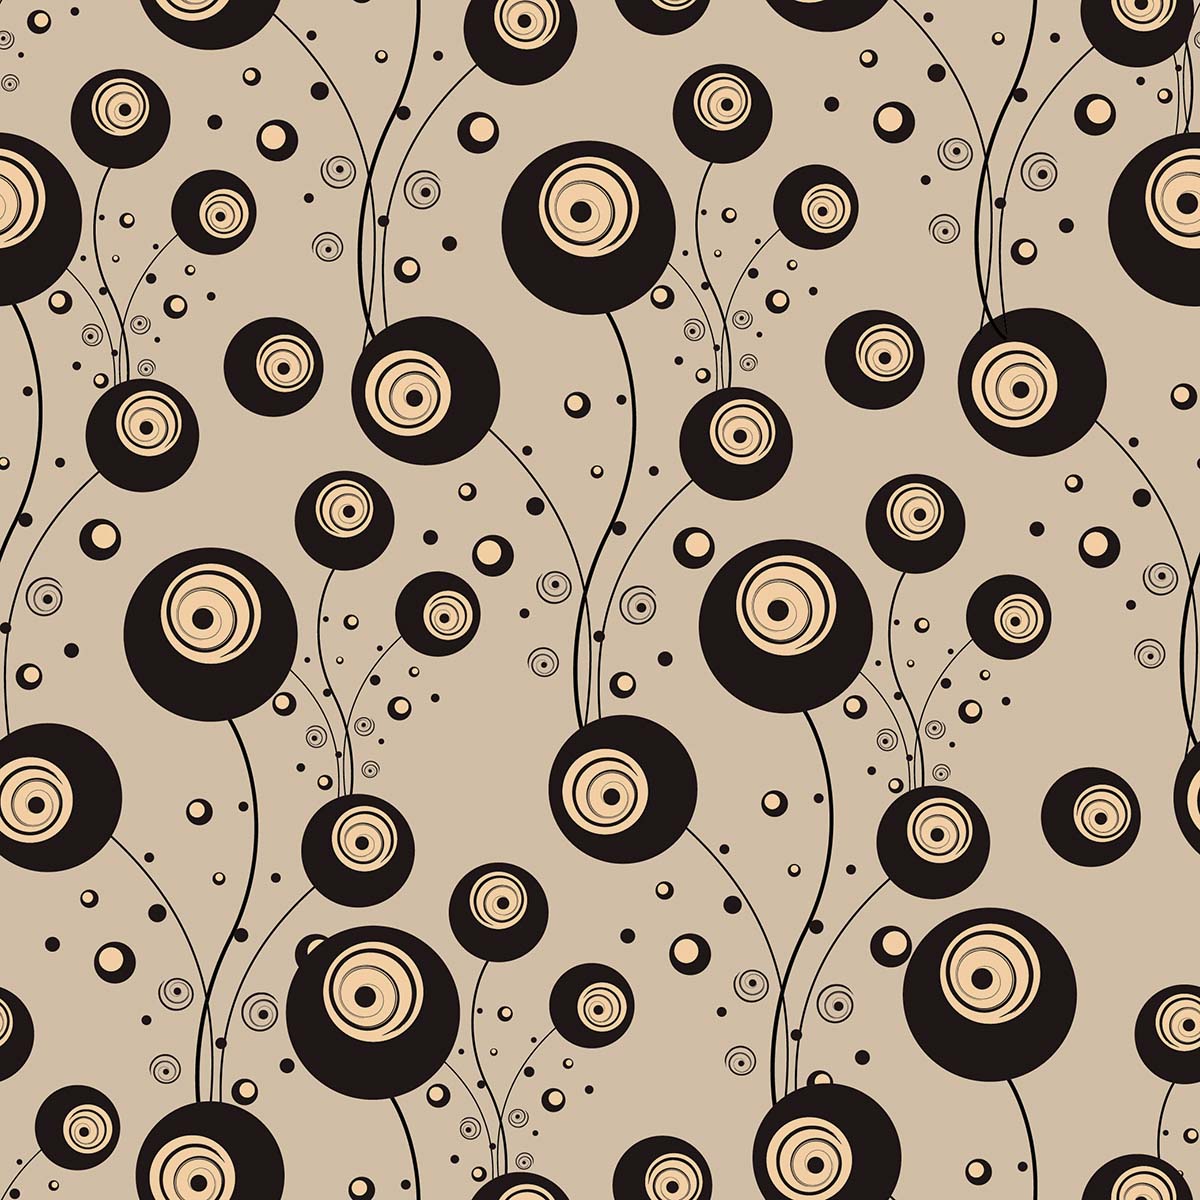 A pattern of circles and vines